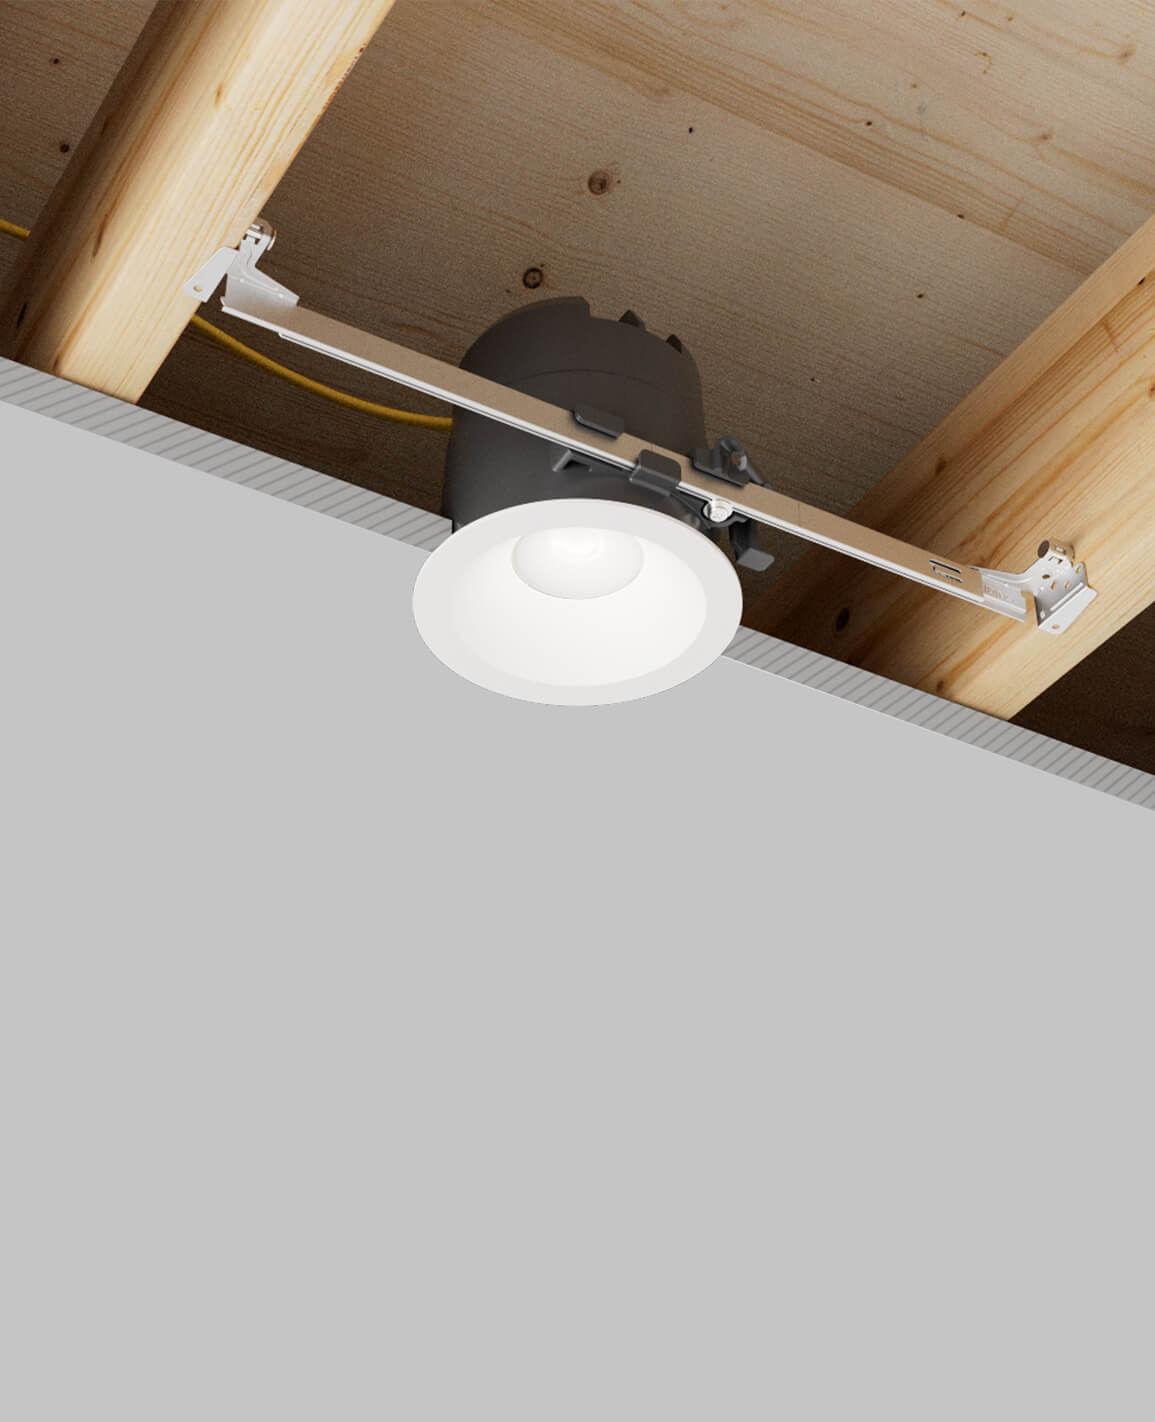 LUSA 4" recessed light with bar hangers housing and white round trim